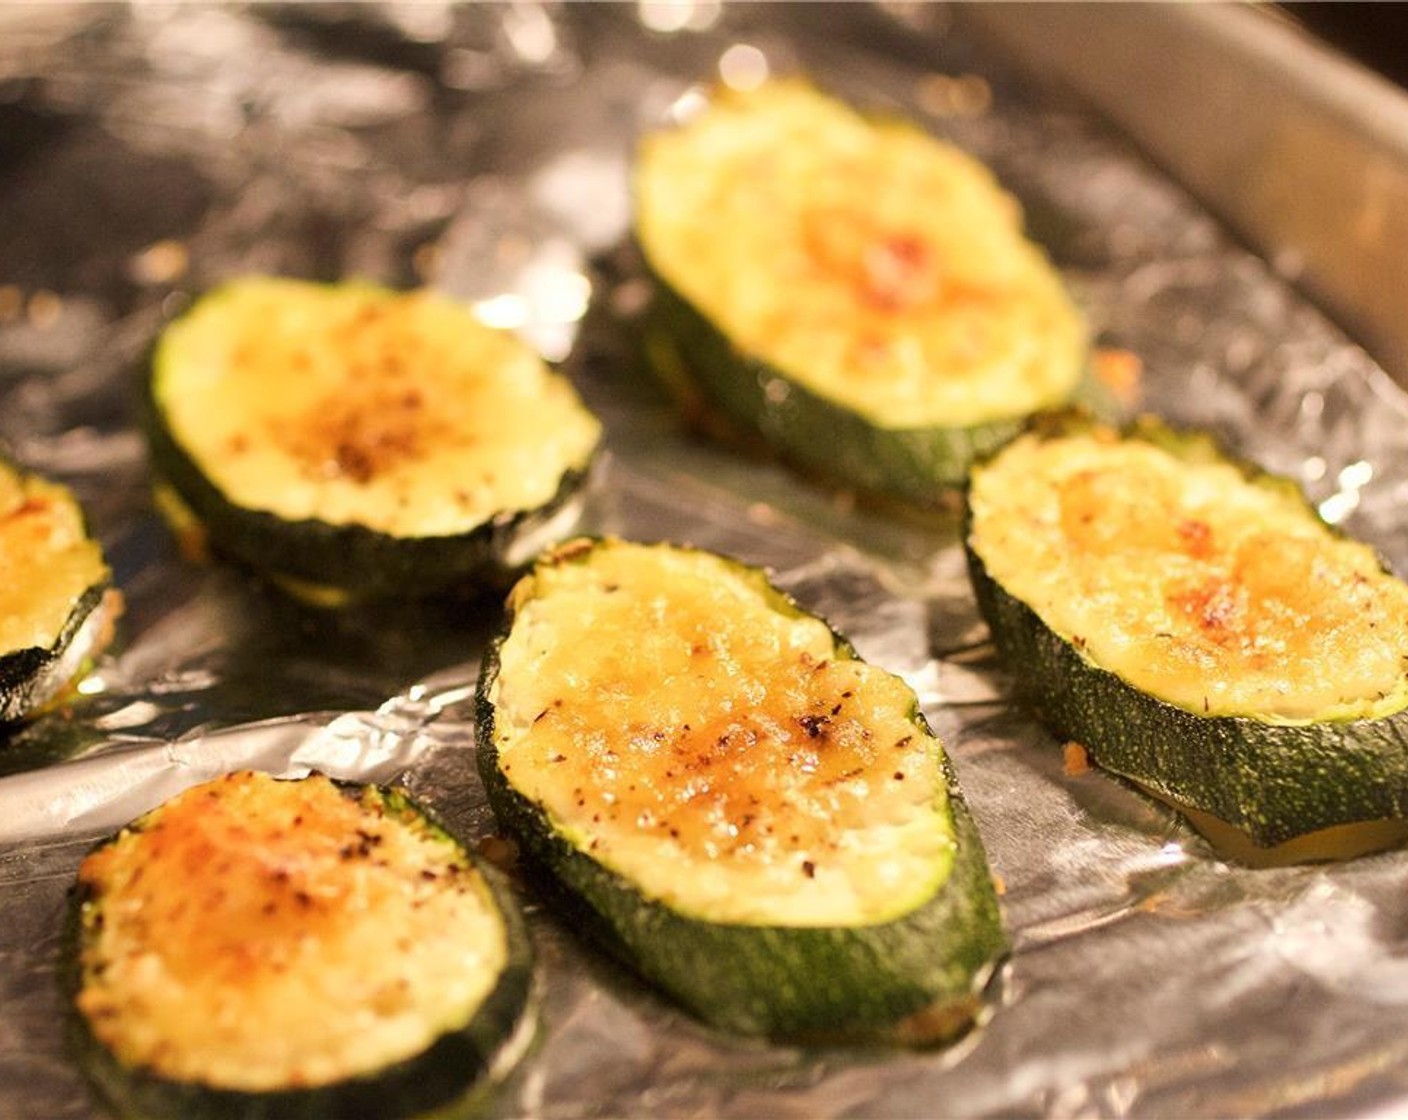 step 6 Meanwhile, drizzle Olive Oil (1 tsp) over the zucchini. Sprinkle Parmesan Cheese (2 Tbsp), Salt (1/4 tsp) and Ground Black Pepper (1/4 tsp) over the zucchini. Roast in the oven for 9 minutes.